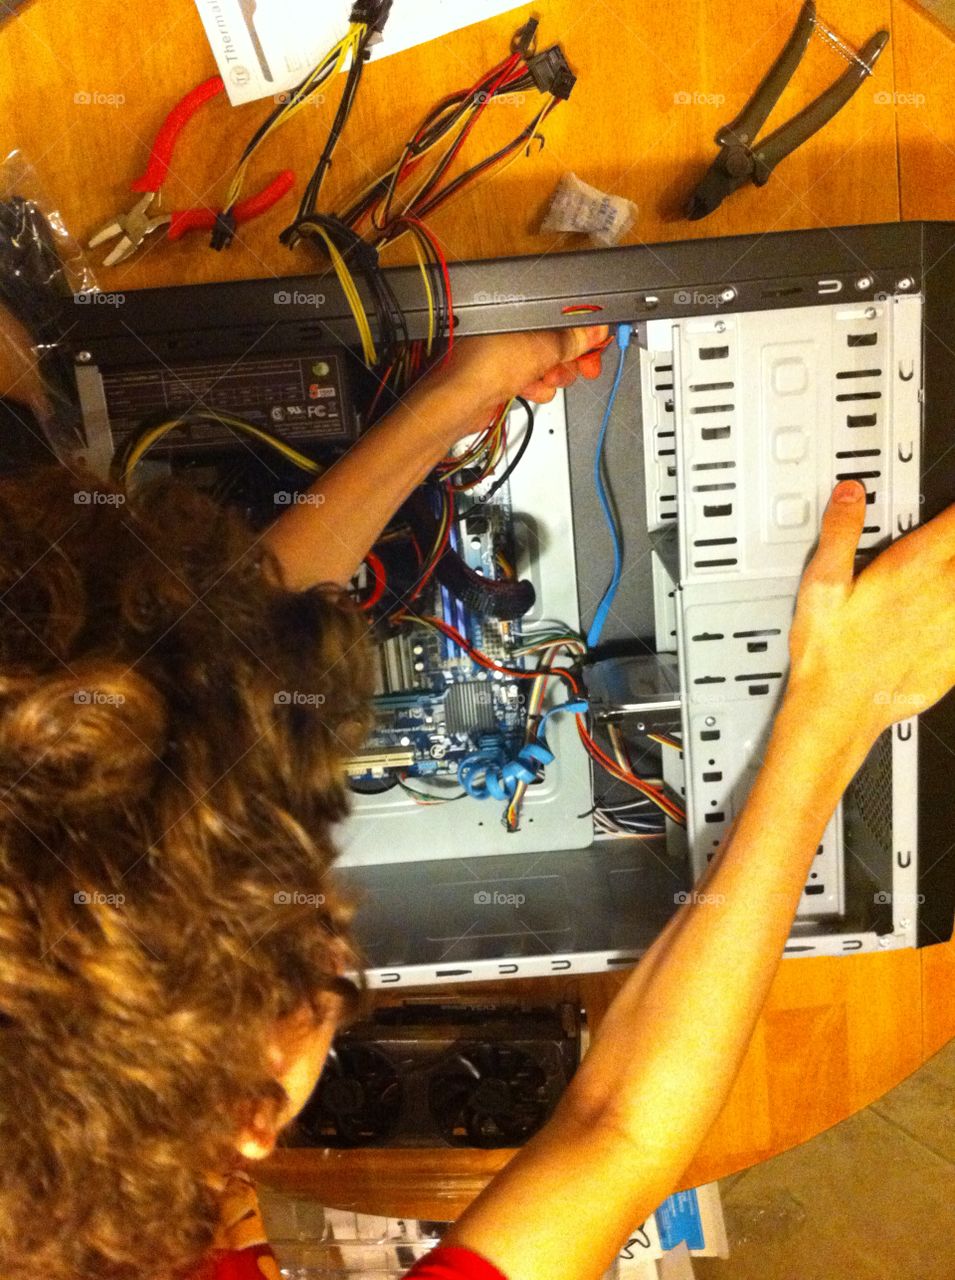 A 14 year old boy builds his first PC on his own. 